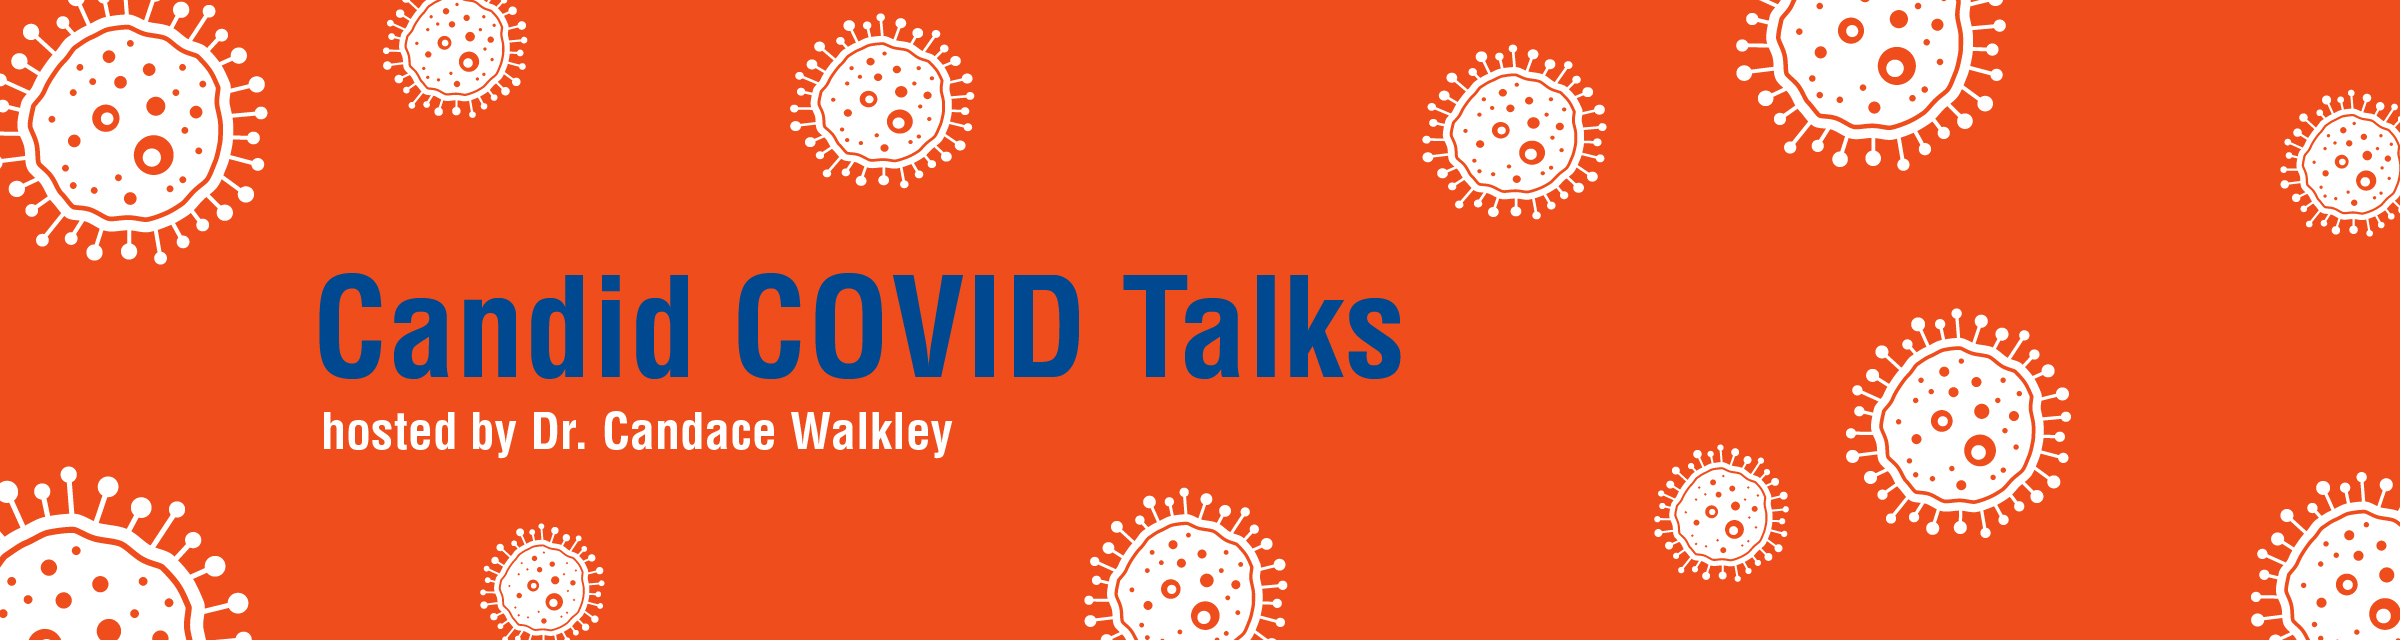 Candid COVID Talks with Dr. Candace Walkley